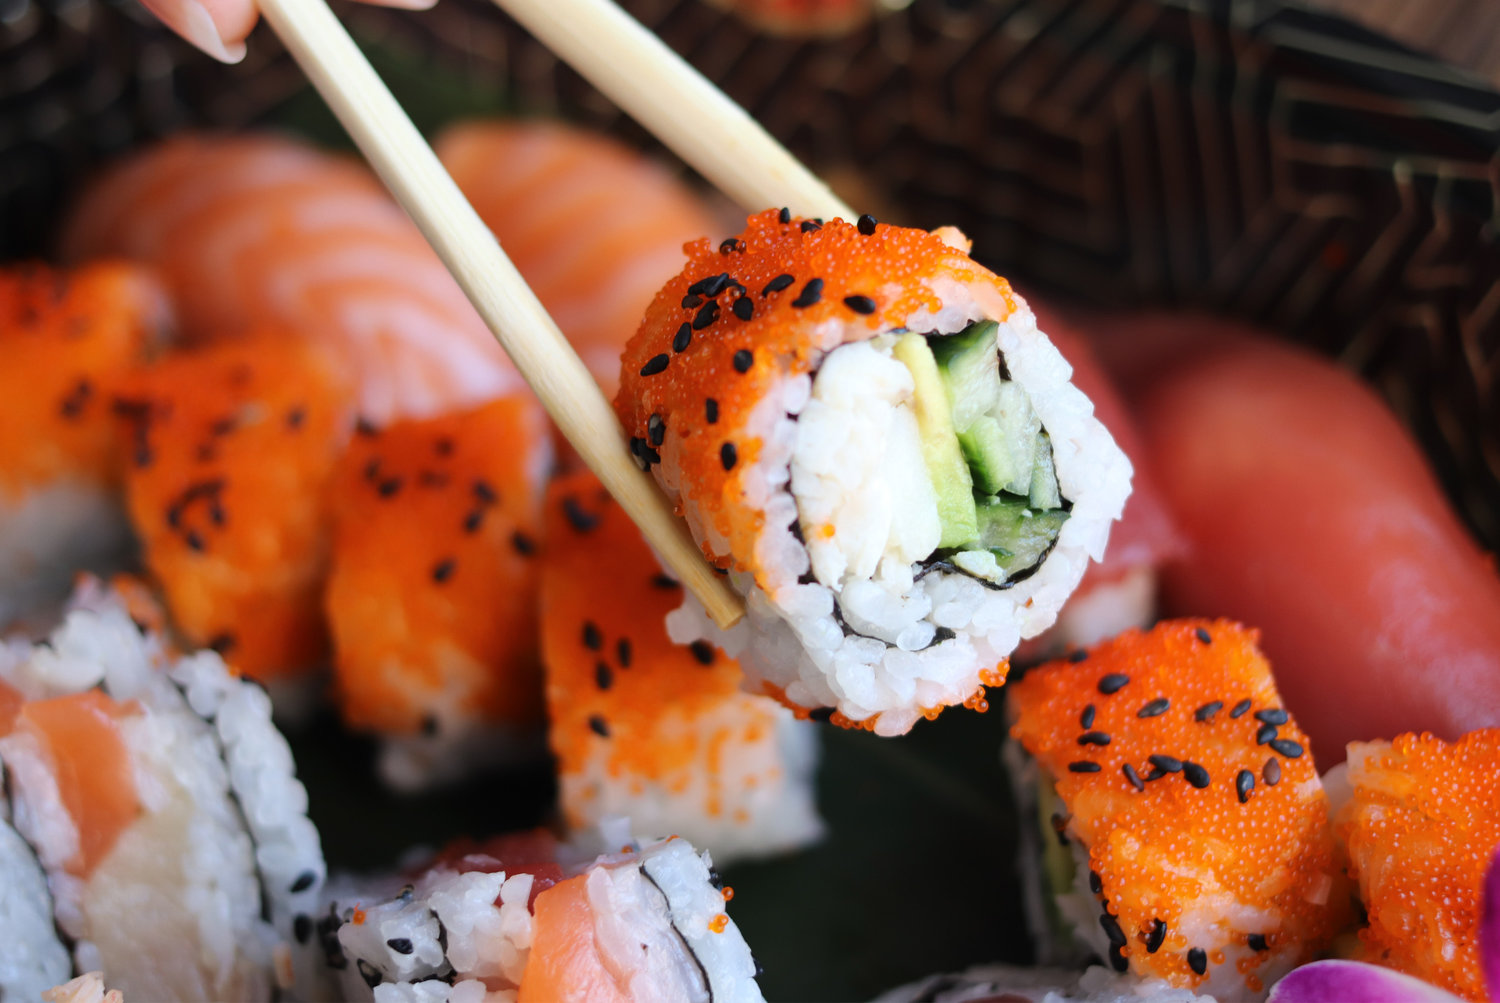 Even the simplest sushi roll impresses with subtle details